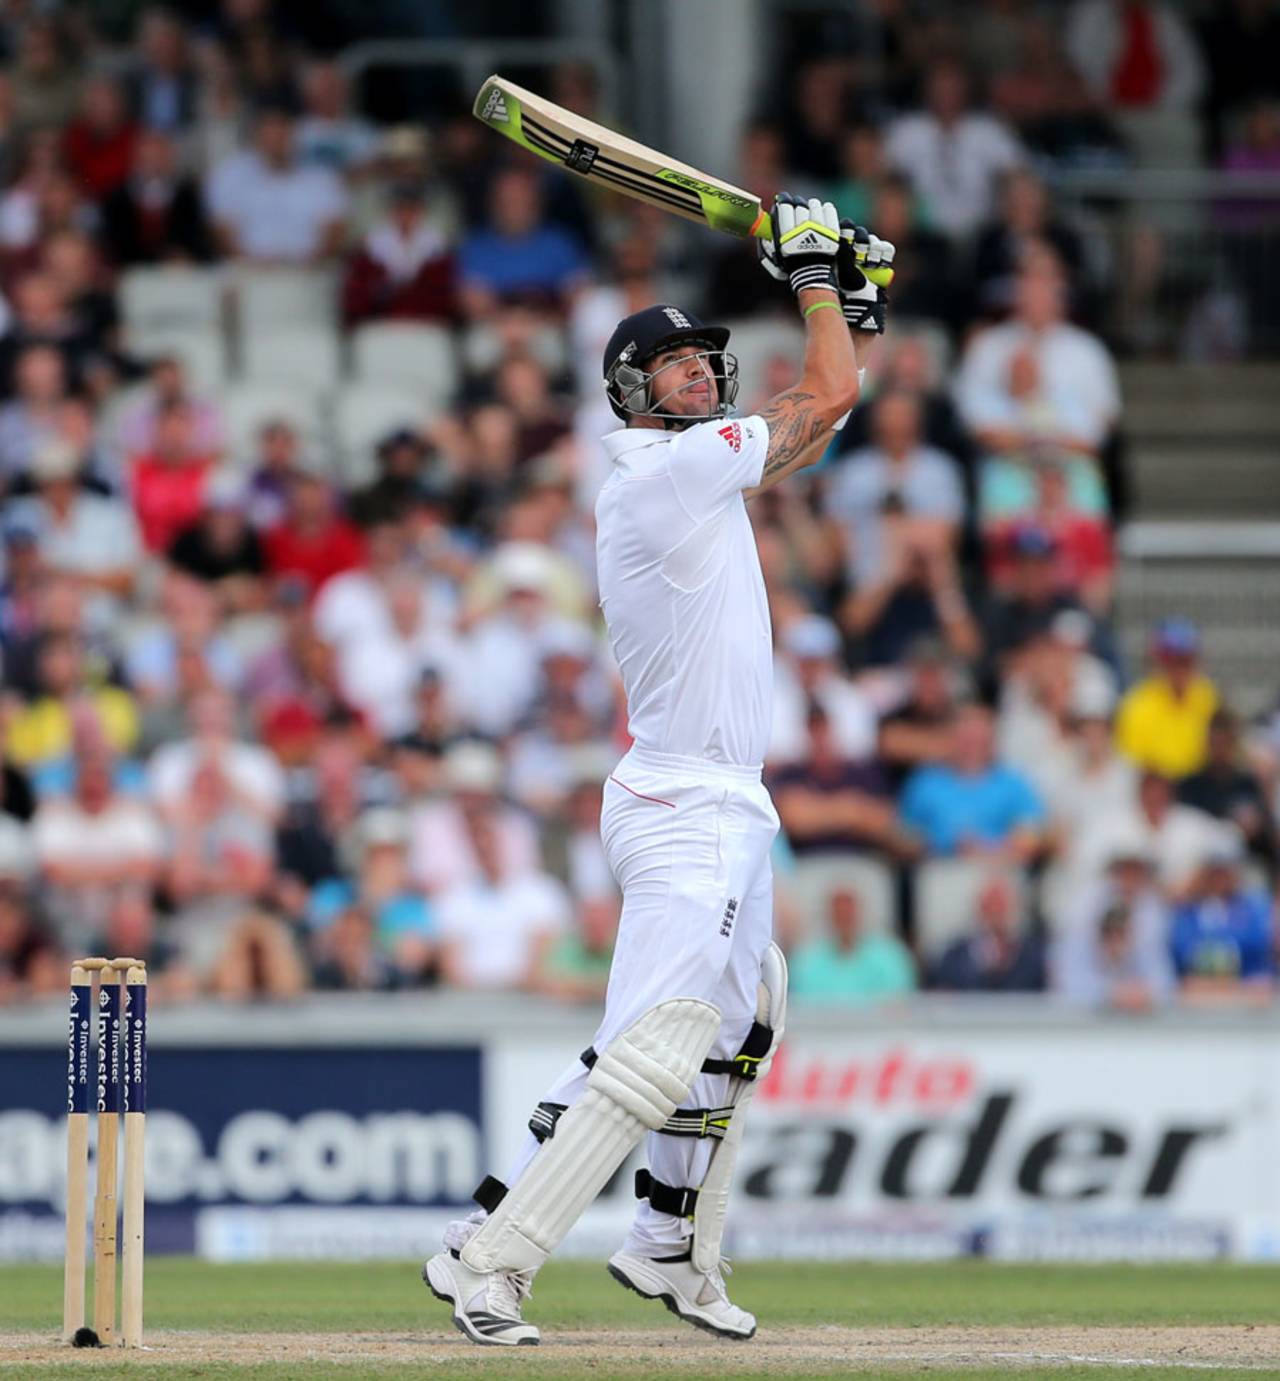 Kevin Pietersen uppercuts to bring up his century, England v Australia, 3rd Investec Test, Old Trafford, 3rd day, August 3, 2013